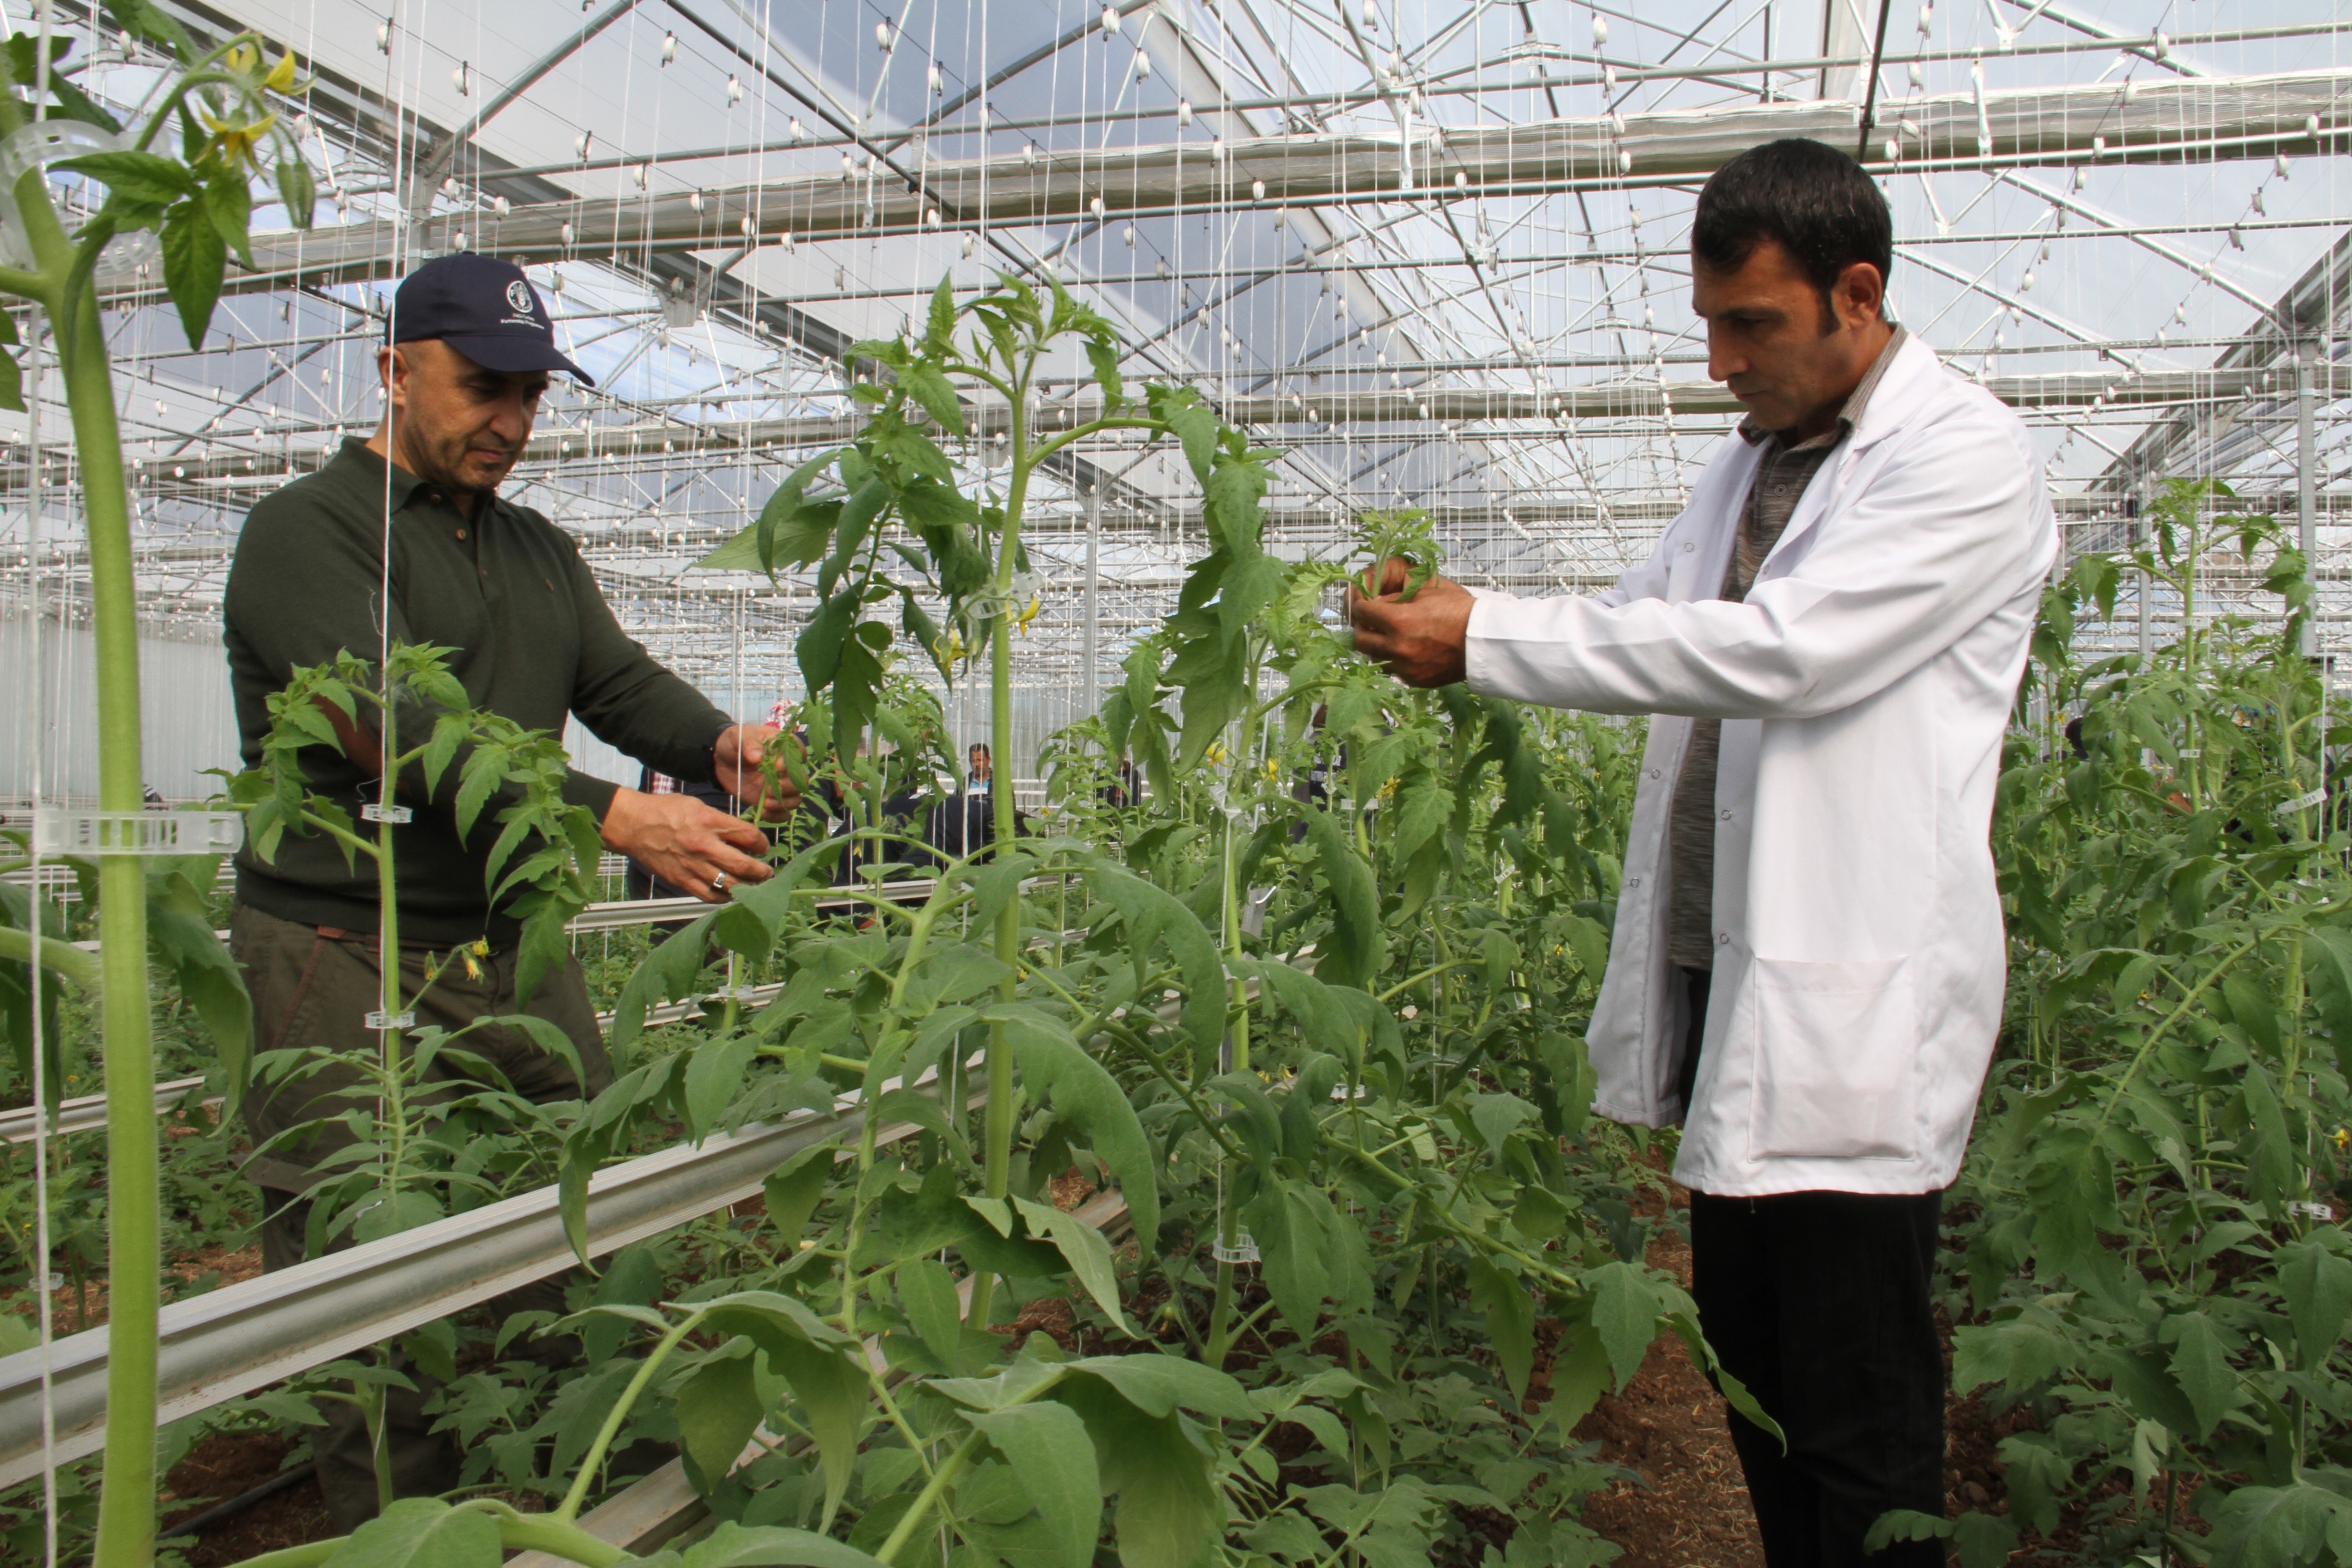 Two men working on crops in a greenhouse